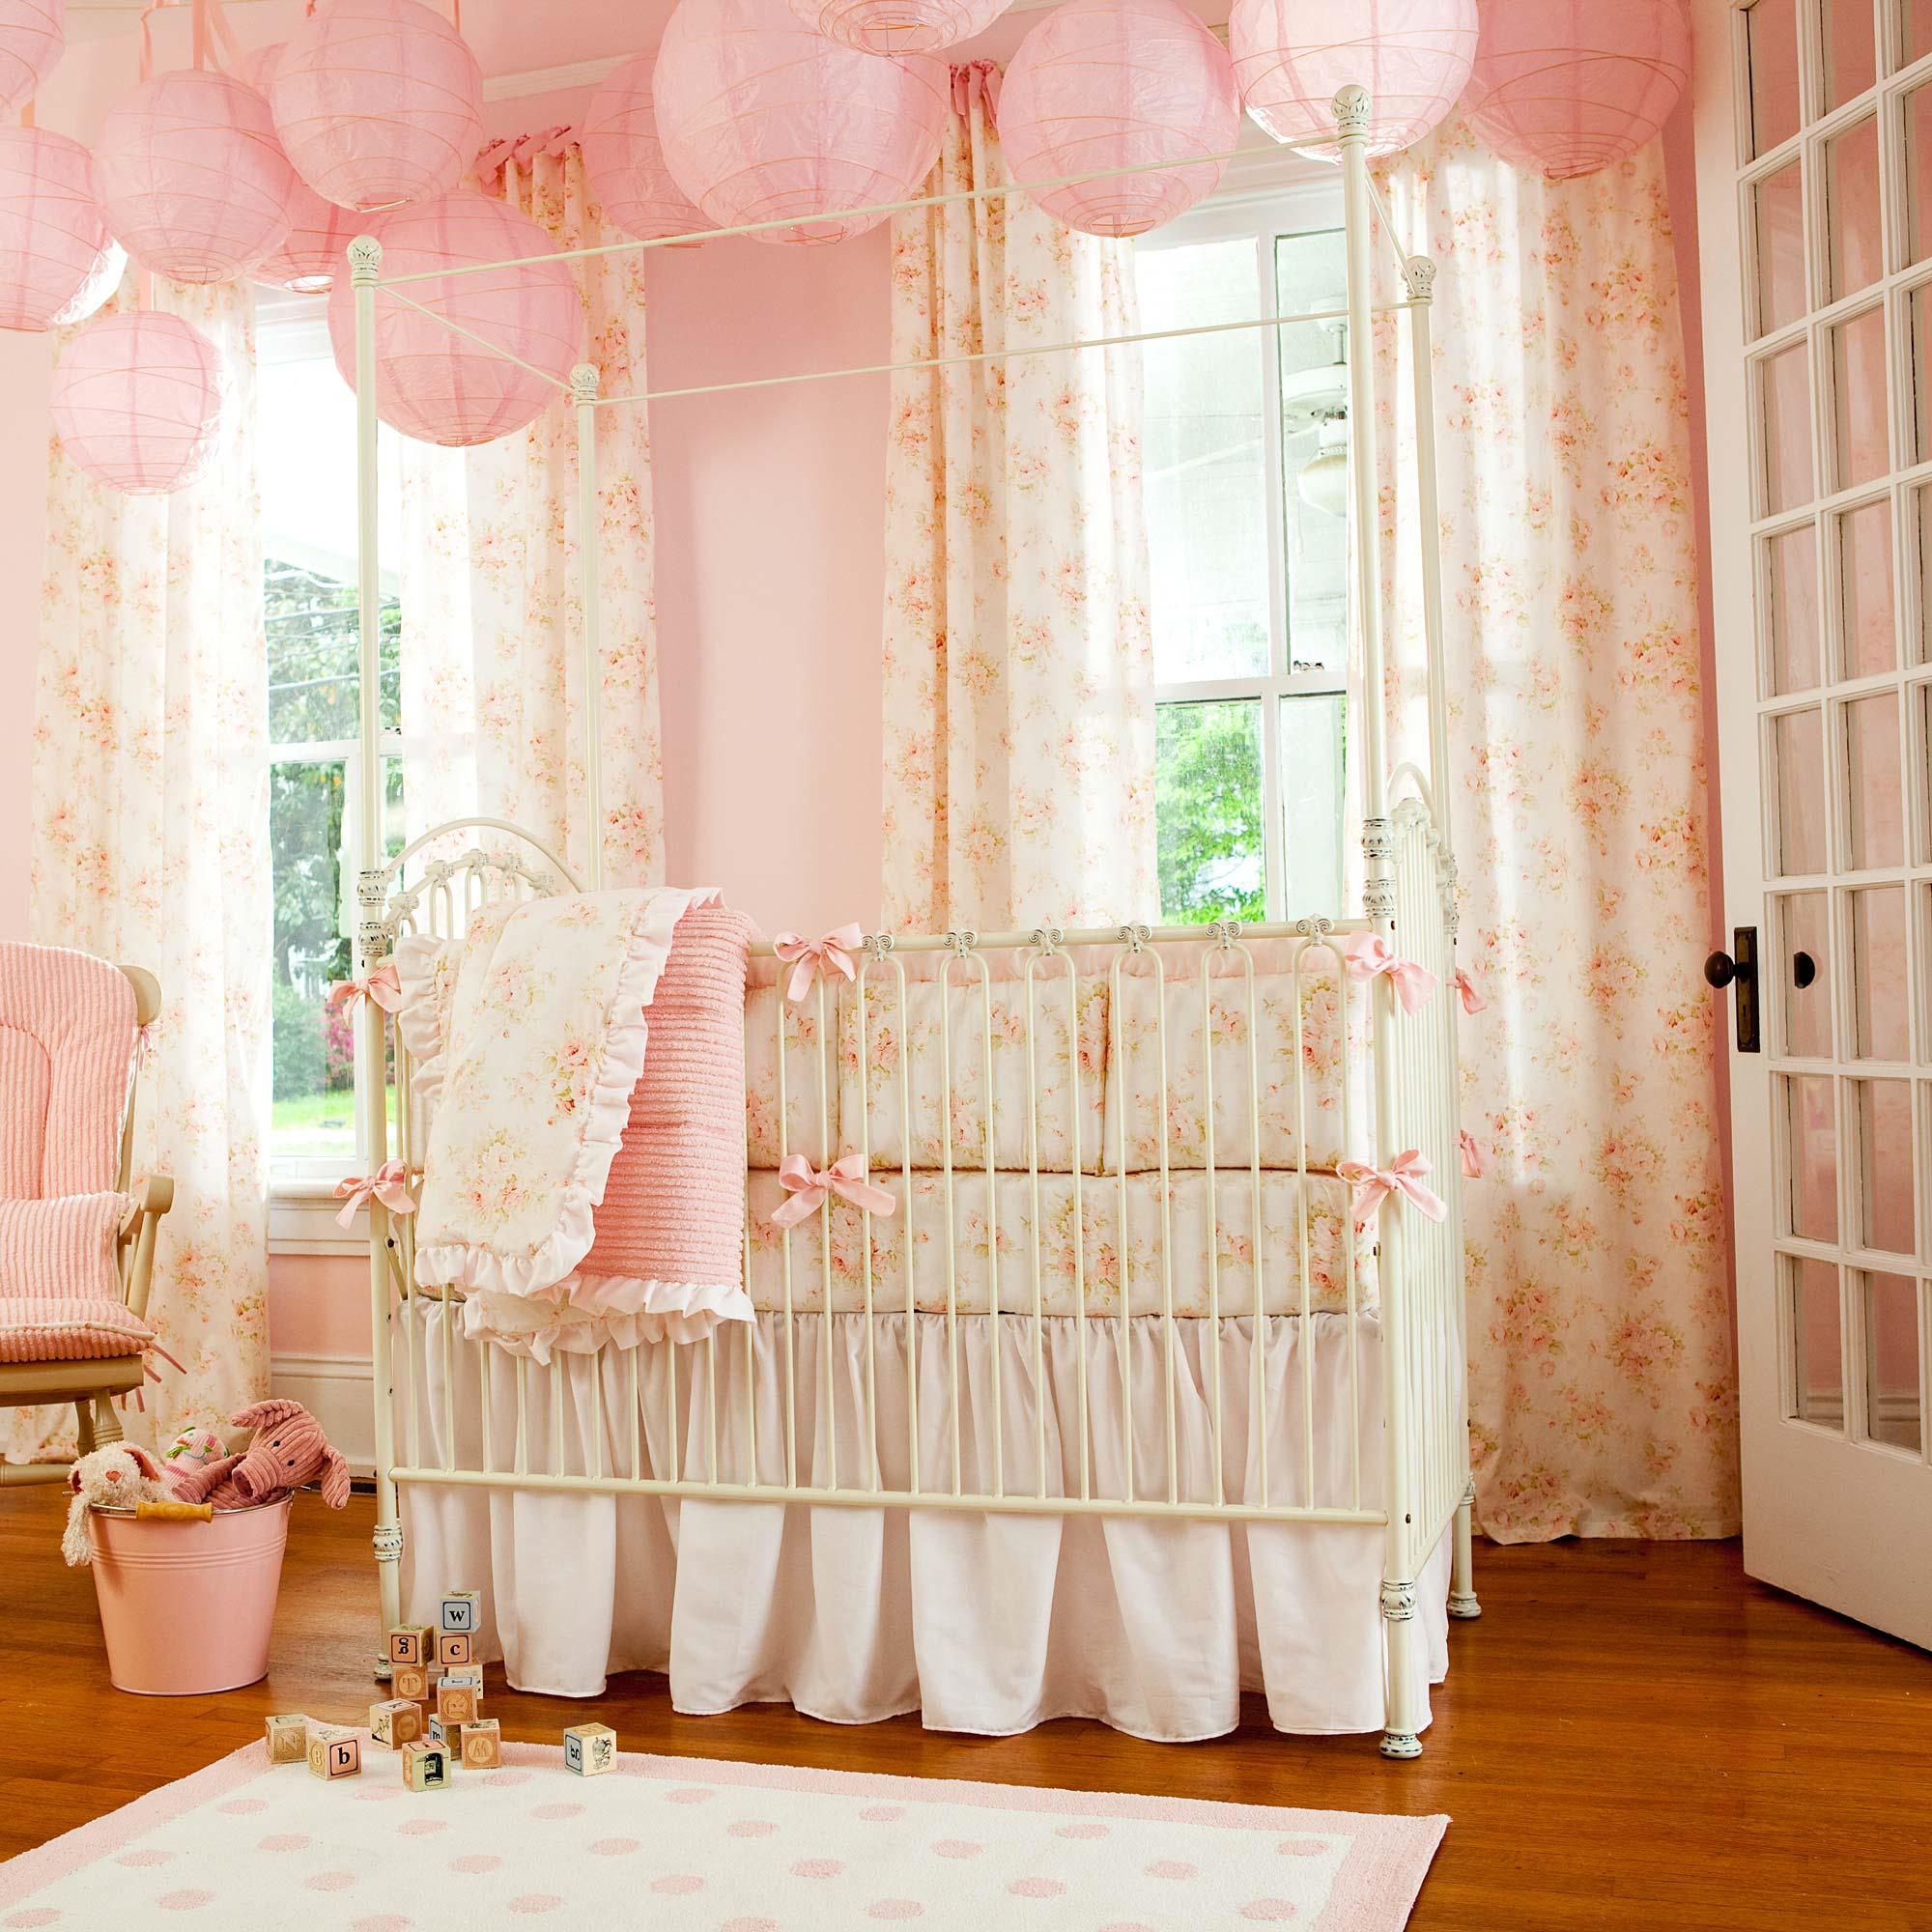 Cute and lively baby girl bedding